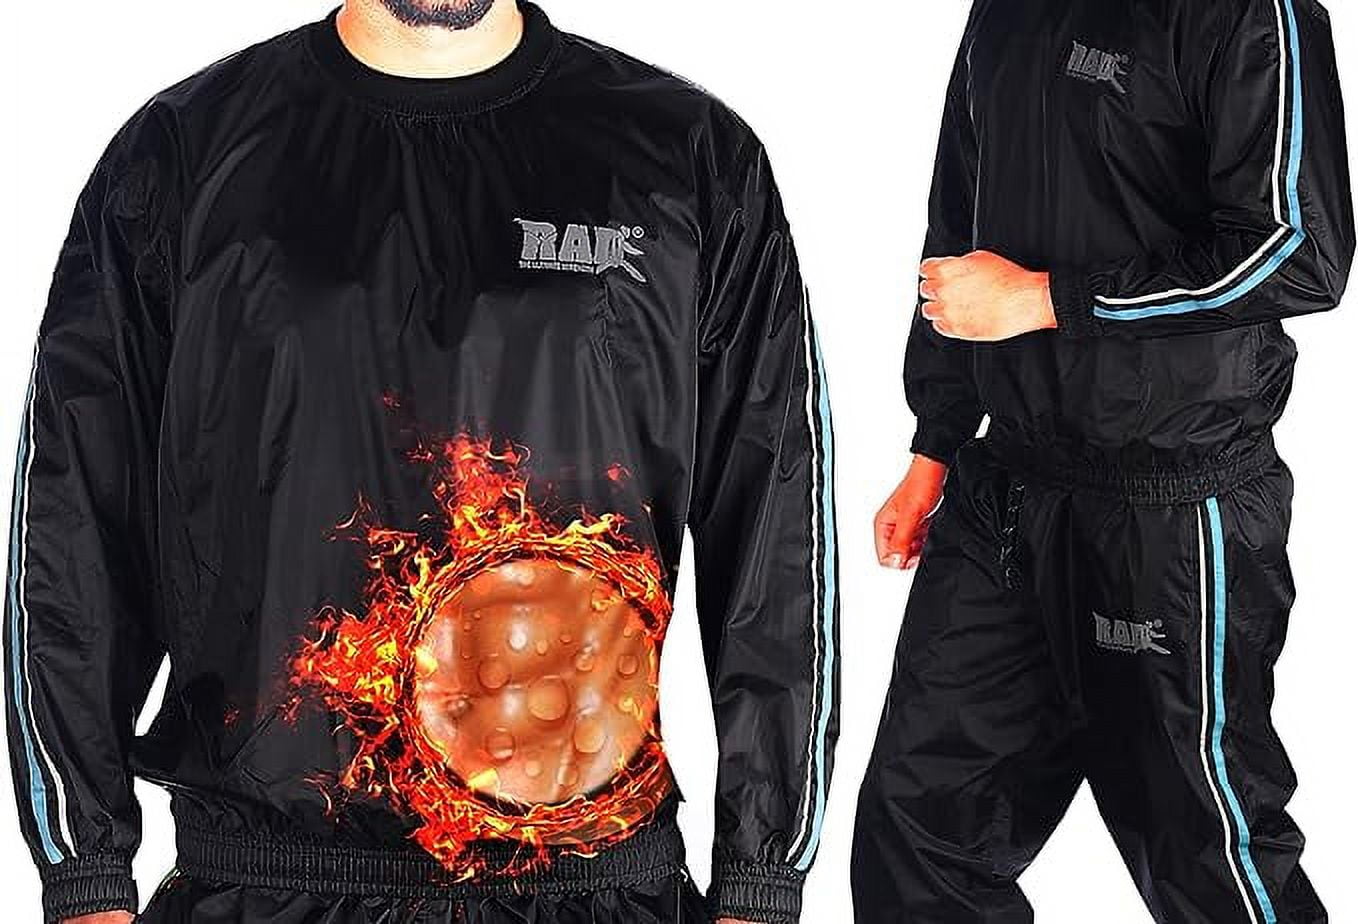 RAD Heavy Duty sauna suit Fitness Weight Loss Sweat Suit Anti-Rip (Red, 6XL)